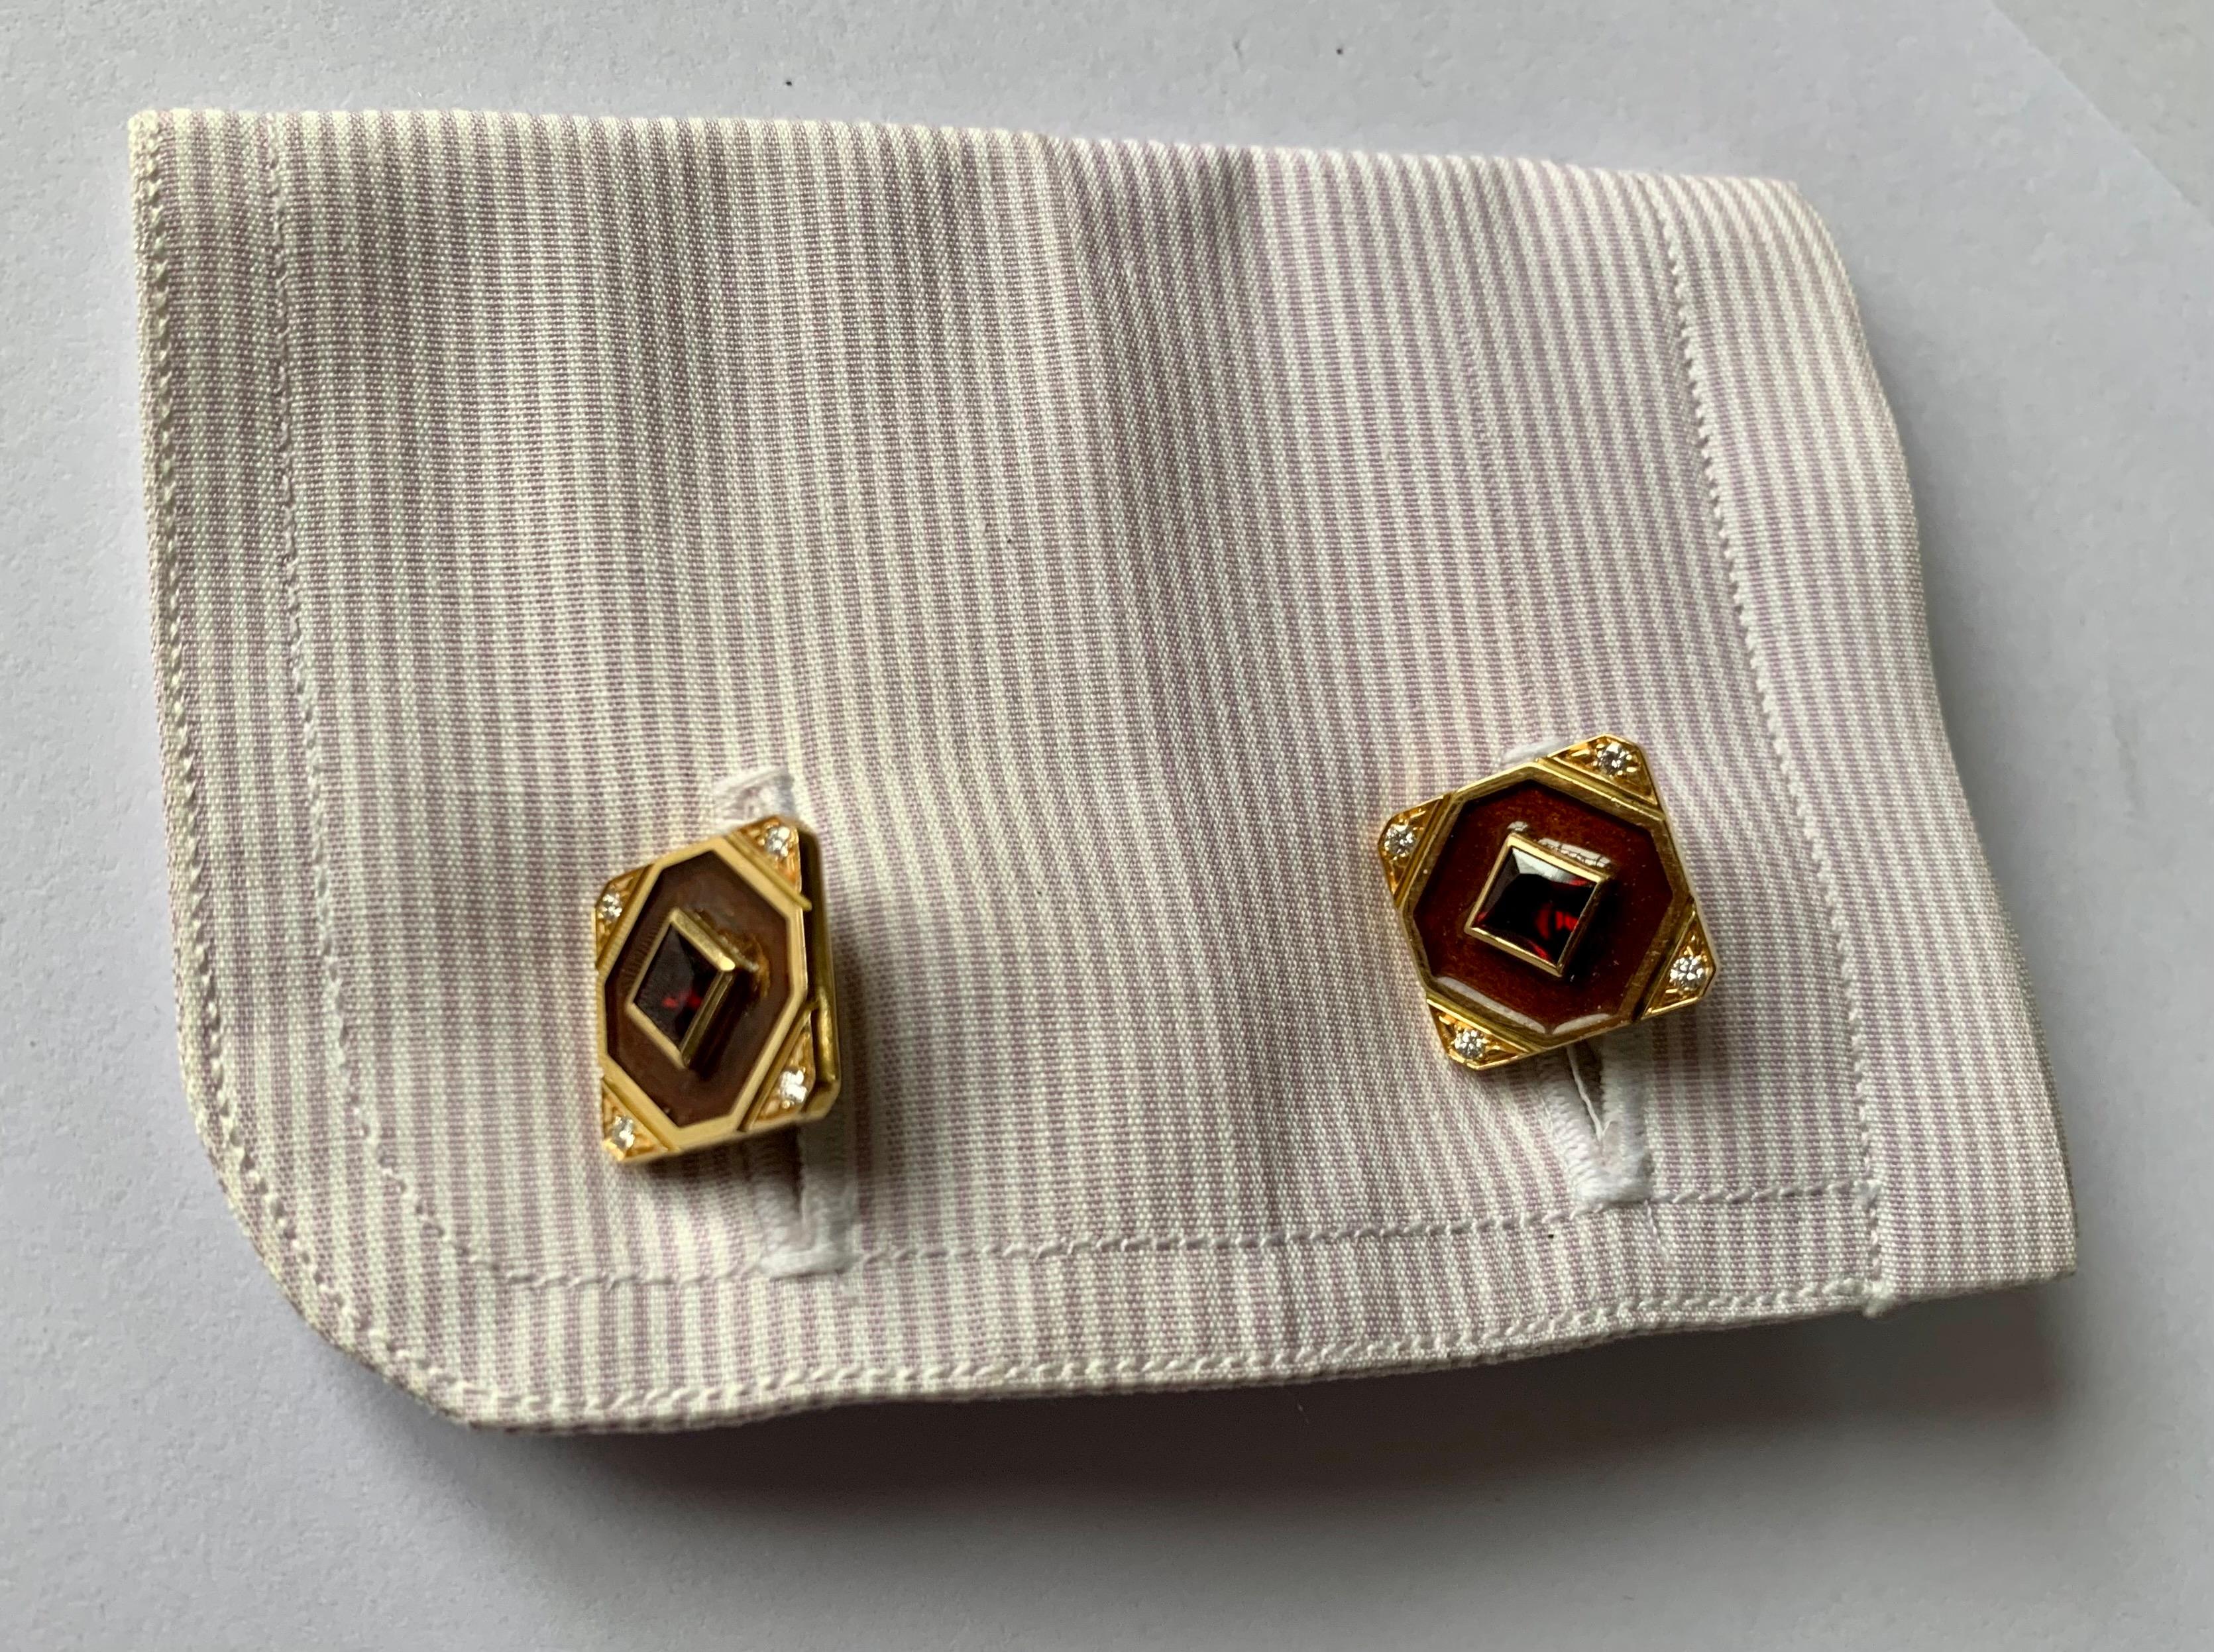 A pair of unusual hand made 18 K yellow Gold cufflinks featuring 2 Garnets weighing 1.72ct  and 8 brilliant cut Diamonds weighing 0.16 ct. Brown enamel to create this harmonious look. The back part of the cufflinks are is made of 2 dome shaped Smoky